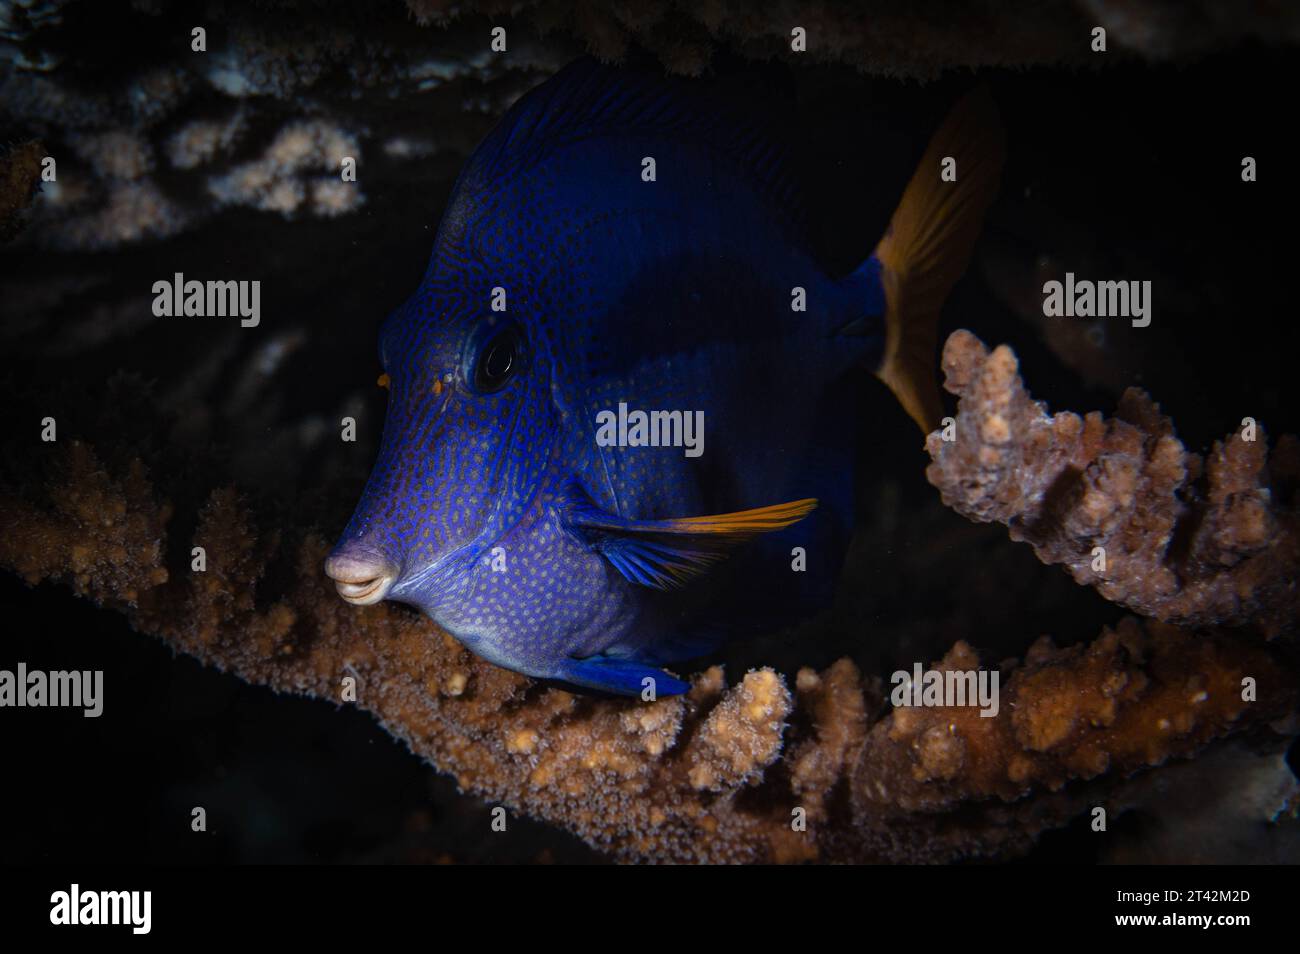 A close-up of a brightly-colored purple tang (Zebrasoma xanthurum) fish swimming under the sea Stock Photo